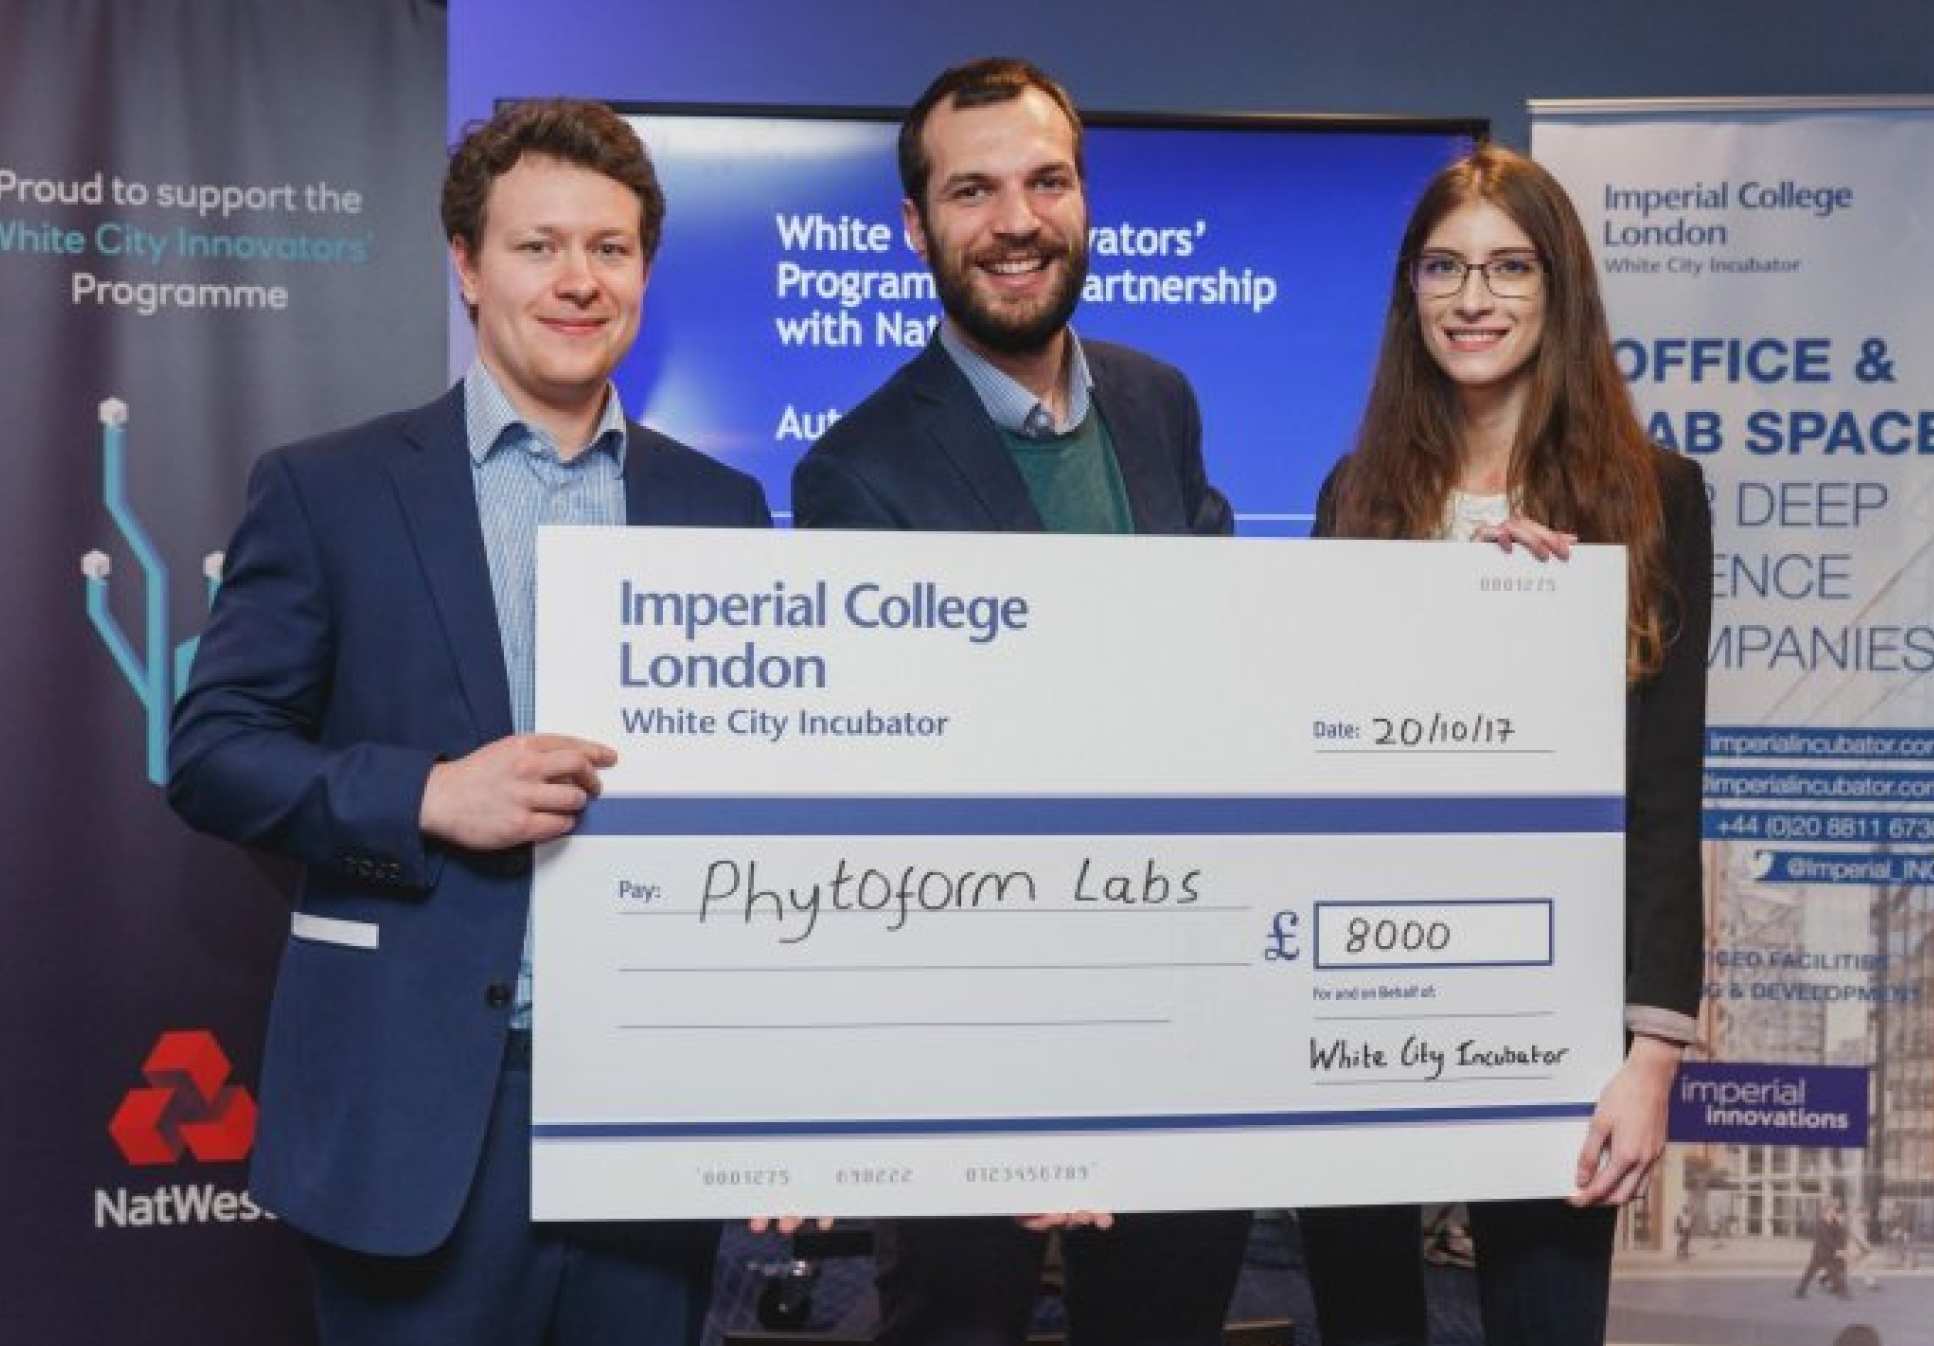 3 members of Phytoform Labs holding a cheque for 8000